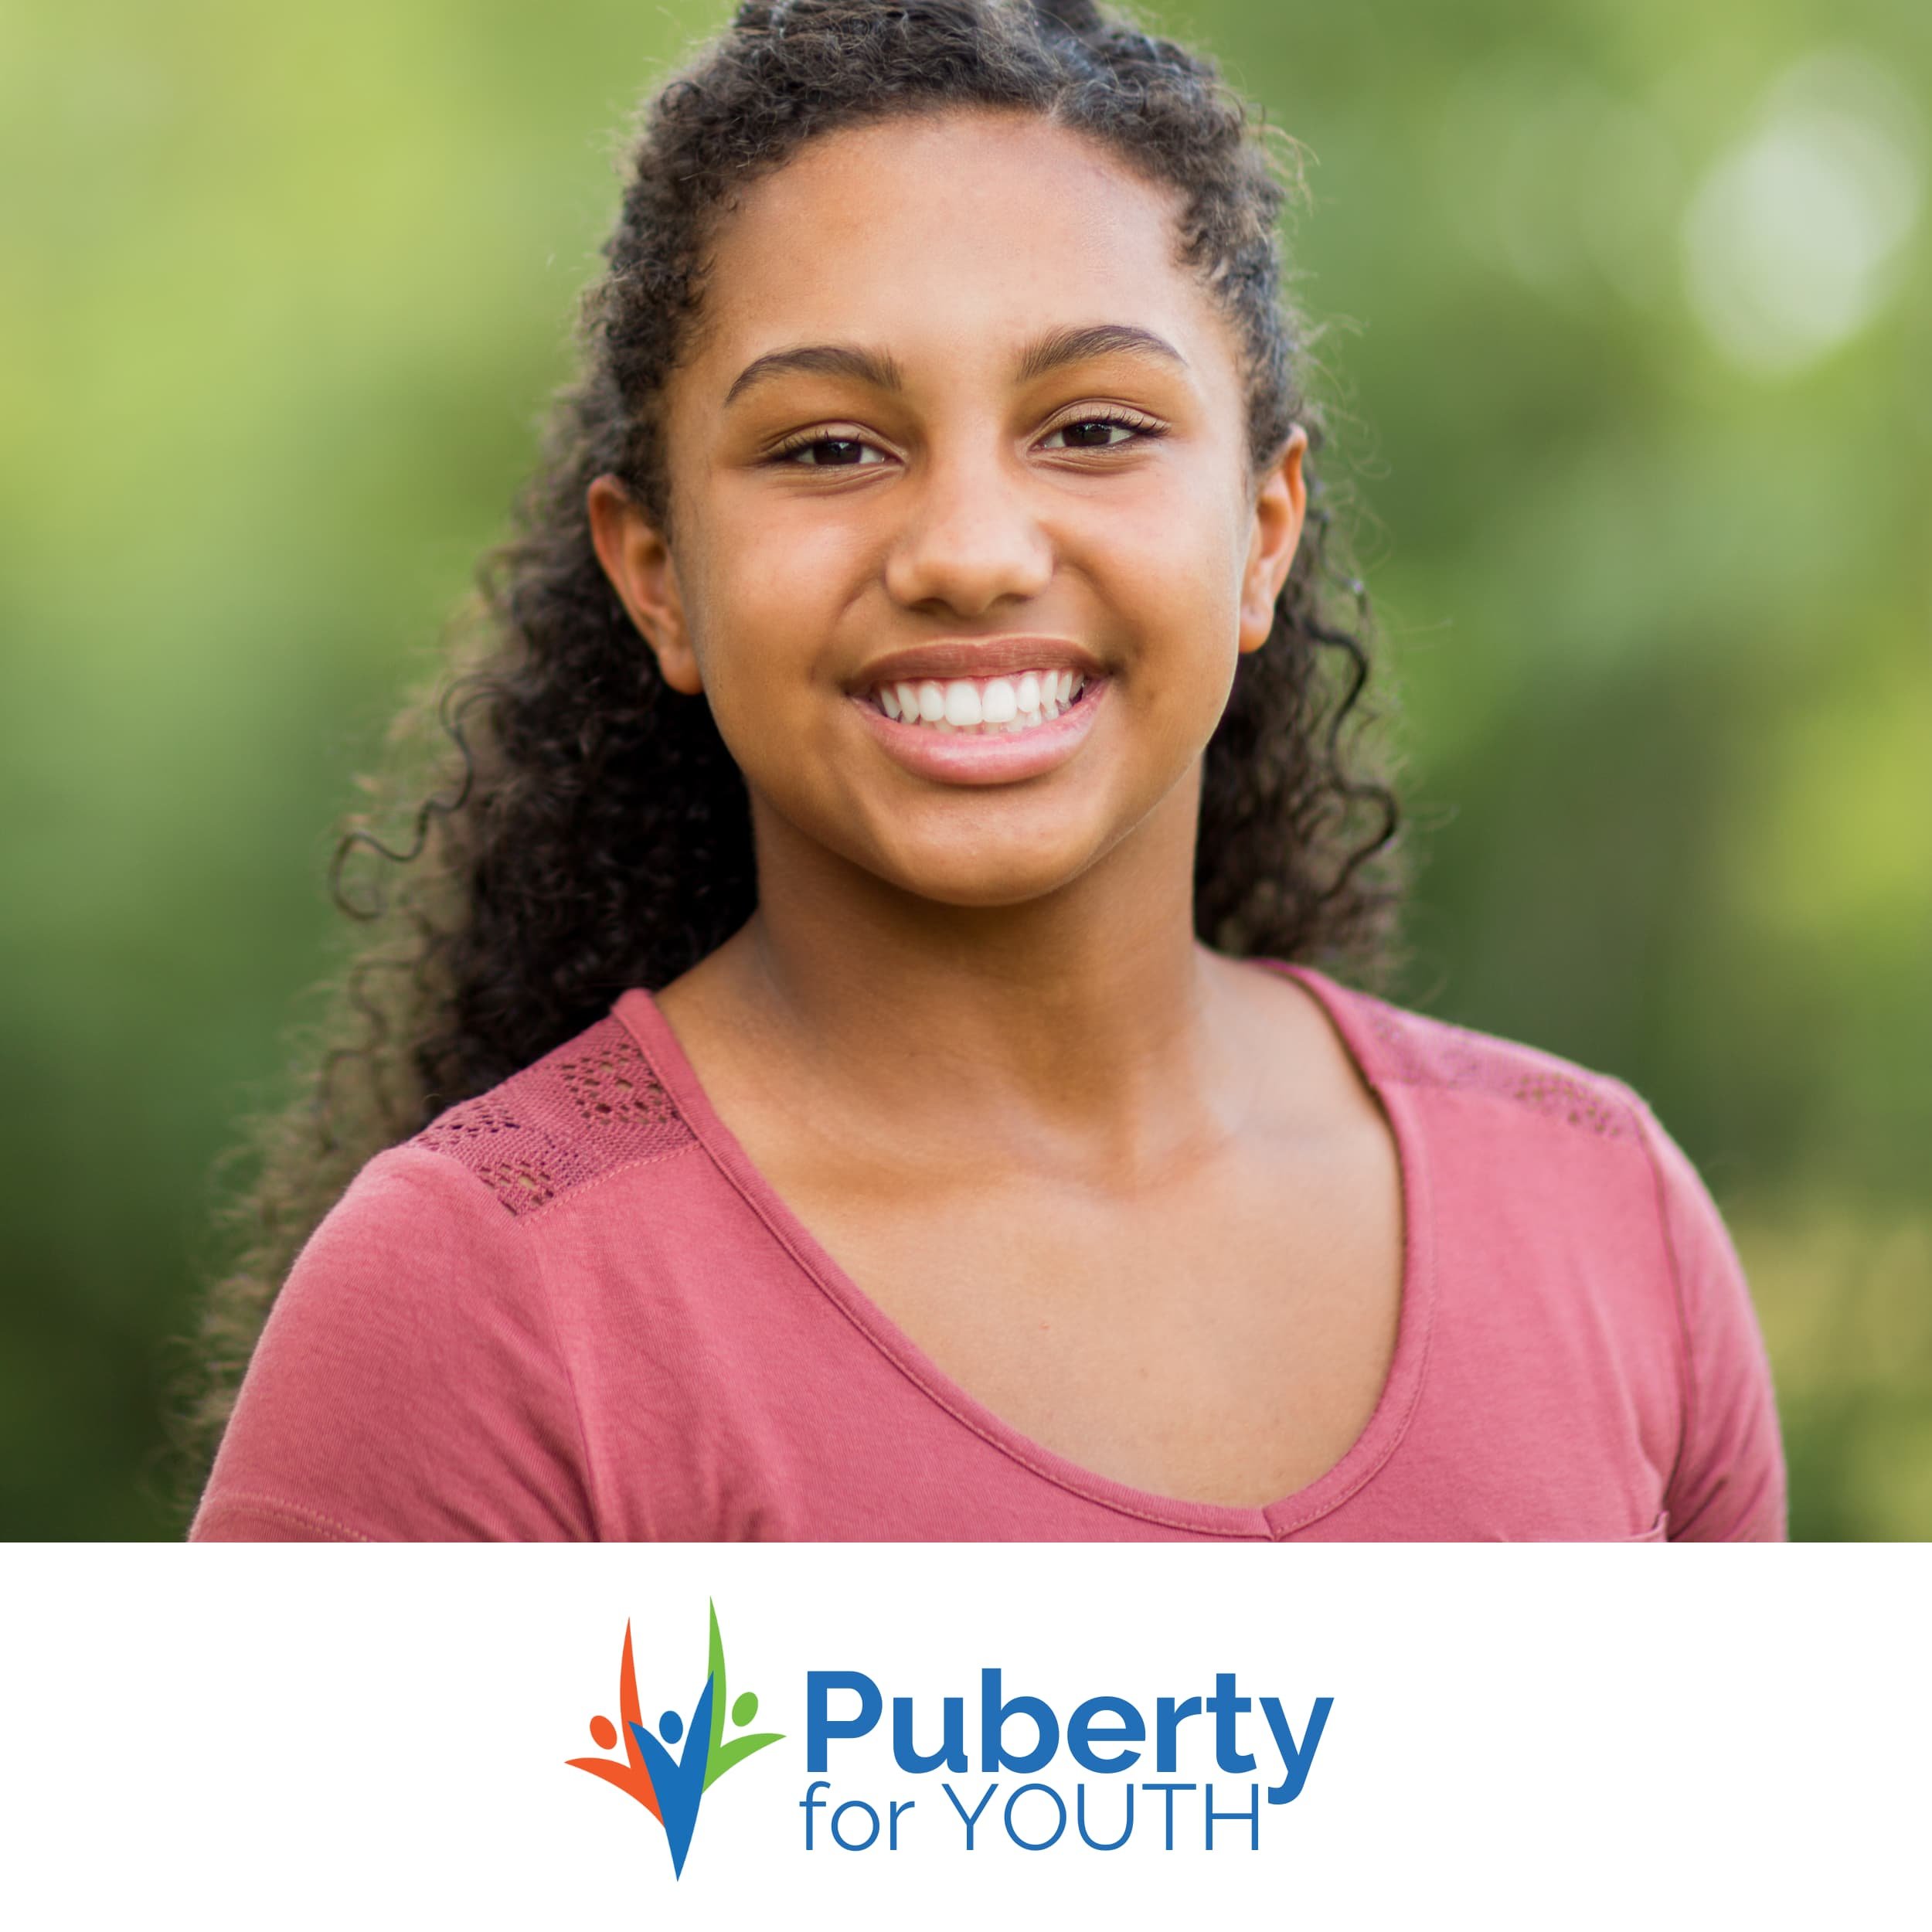 Puberty for Youth with Autism — Lake Ridge Community Support Services